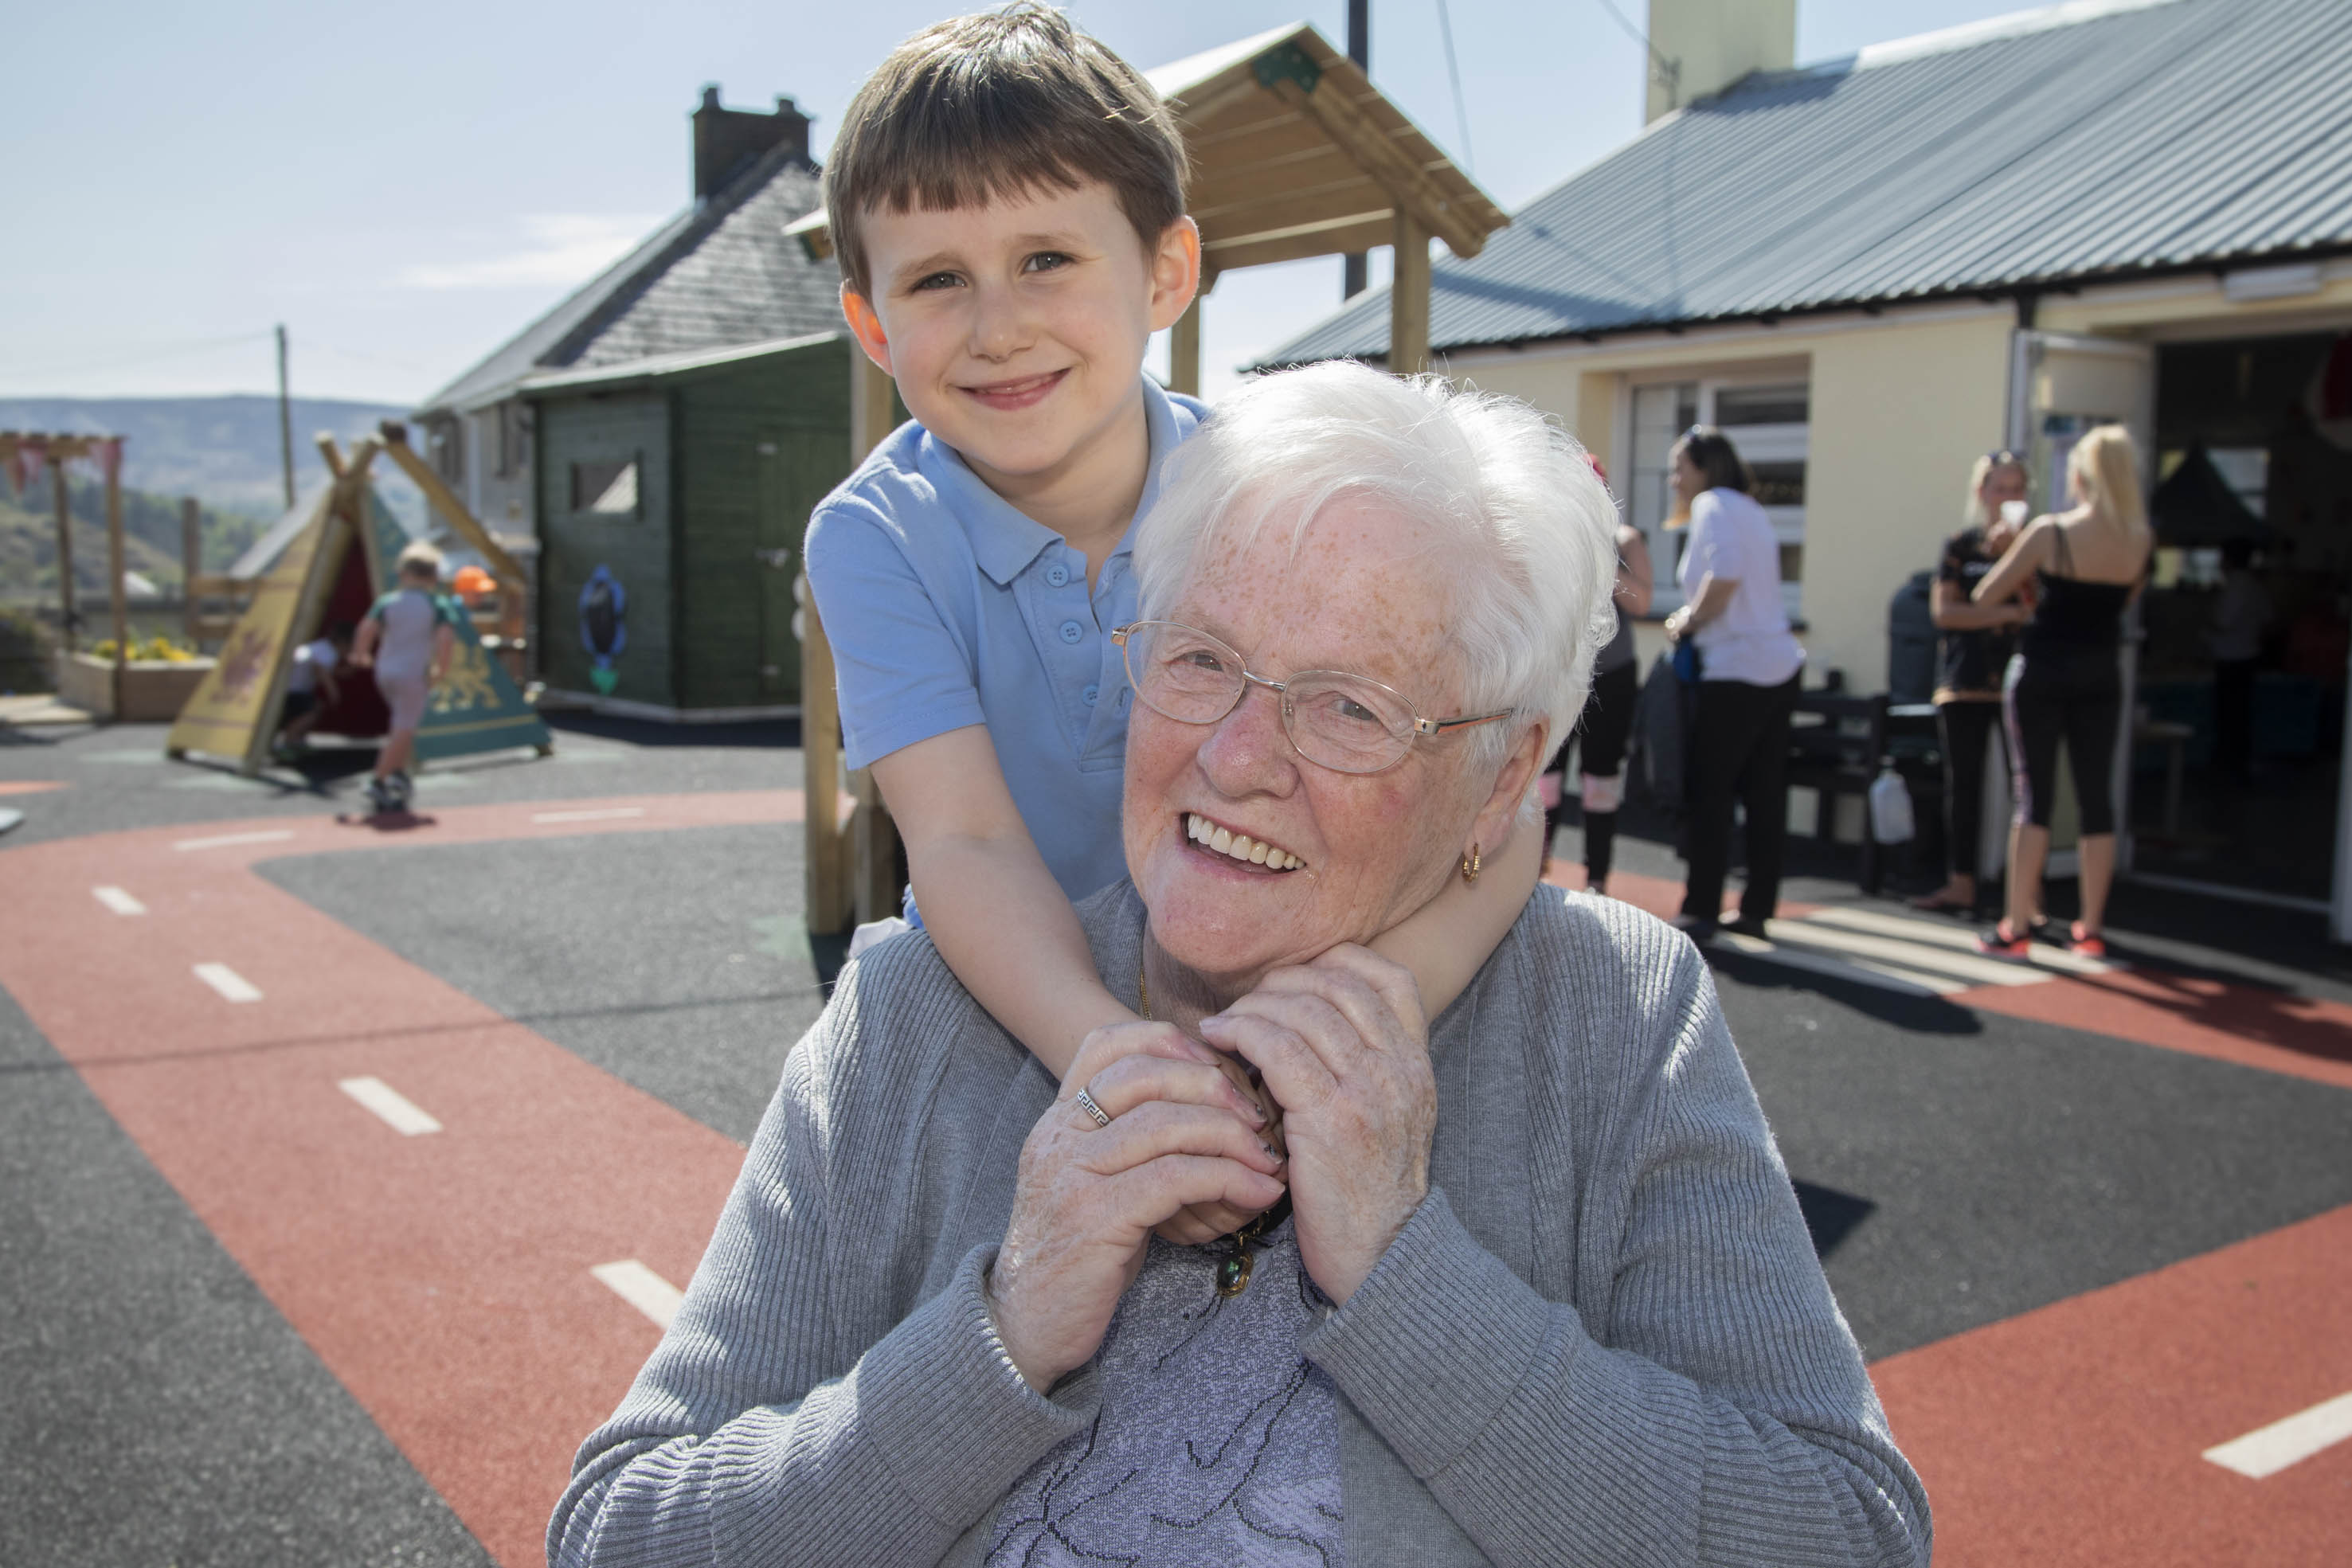 Daredevil grandmother Carys is guest of honour at opening of new nursery play area